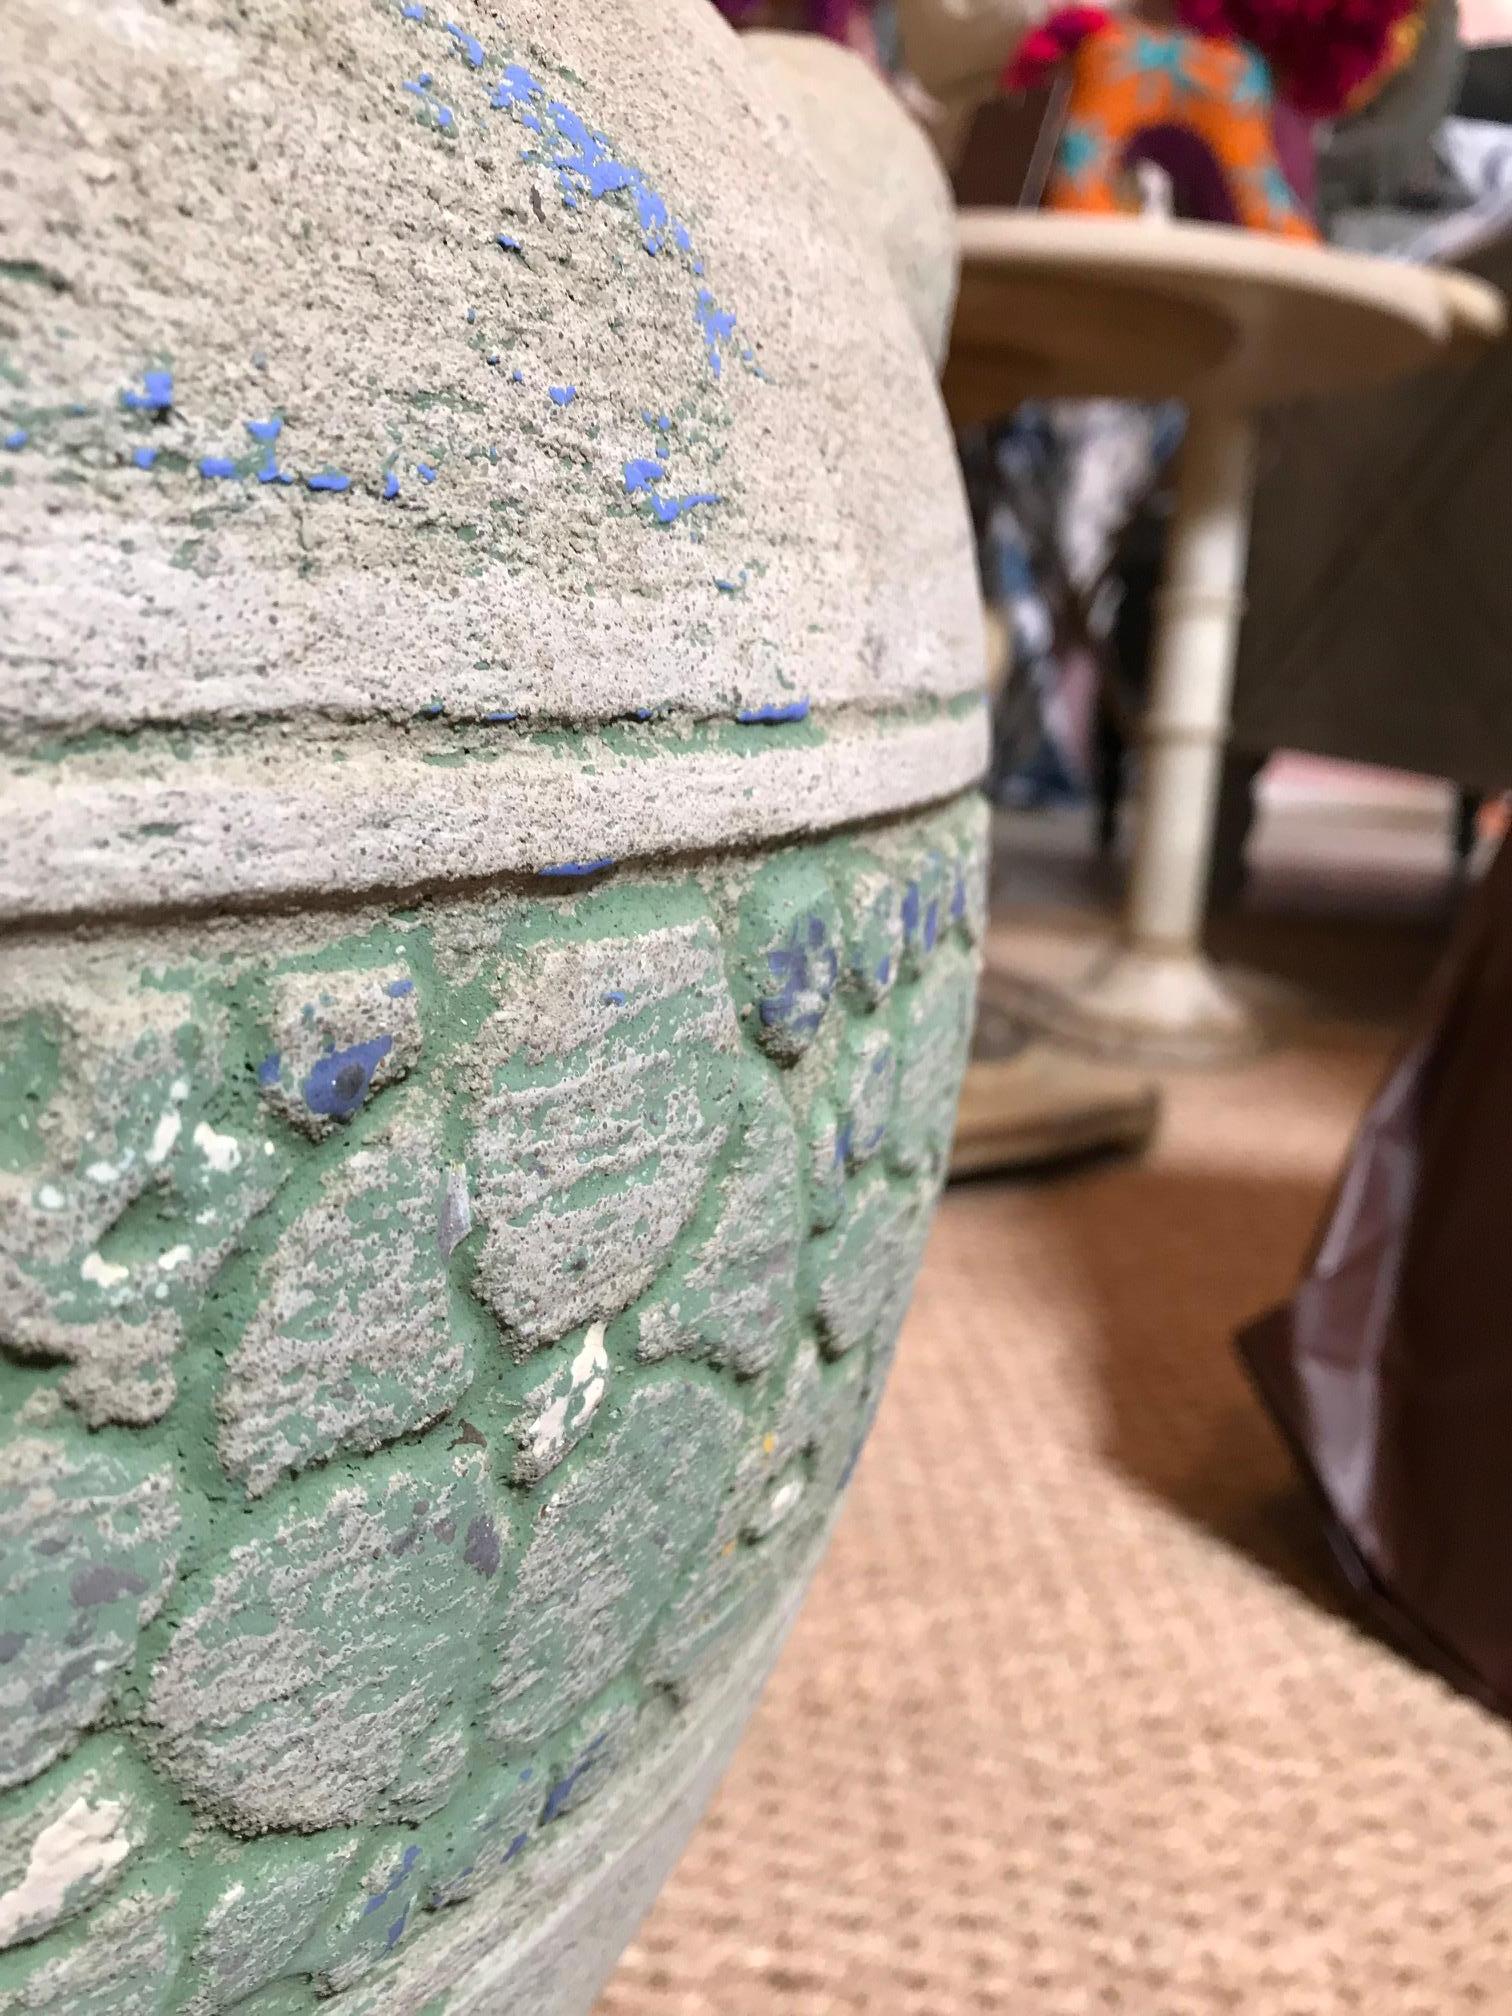 This pot is made from a hard porous, rock-like material. It has a section wrapped around it with decoratively pieced-together flower engravings. The section is a light leafy green strewn with spots of sky blue throughout the piece. The inside is